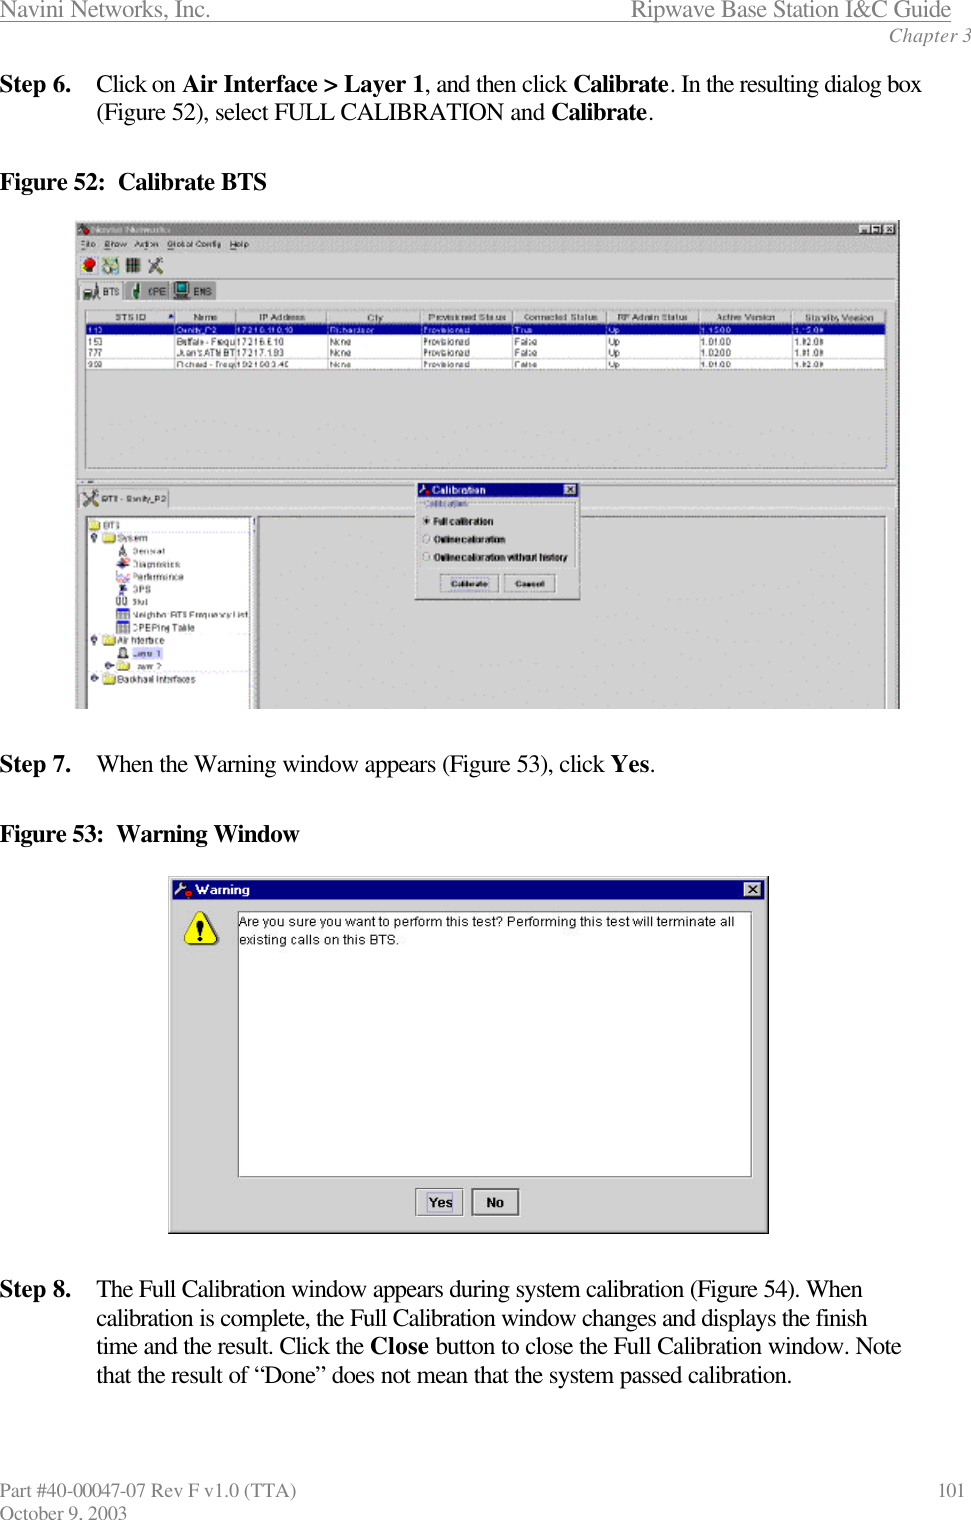 Navini Networks, Inc.                           Ripwave Base Station I&amp;C Guide Chapter 3 Part #40-00047-07 Rev F v1.0 (TTA)                             101 October 9, 2003 Step 6. Click on Air Interface &gt; Layer 1, and then click Calibrate. In the resulting dialog box (Figure 52), select FULL CALIBRATION and Calibrate.  Figure 52:  Calibrate BTS  Step 7. When the Warning window appears (Figure 53), click Yes.  Figure 53:  Warning Window  Step 8. The Full Calibration window appears during system calibration (Figure 54). When calibration is complete, the Full Calibration window changes and displays the finish time and the result. Click the Close button to close the Full Calibration window. Note that the result of “Done” does not mean that the system passed calibration.    